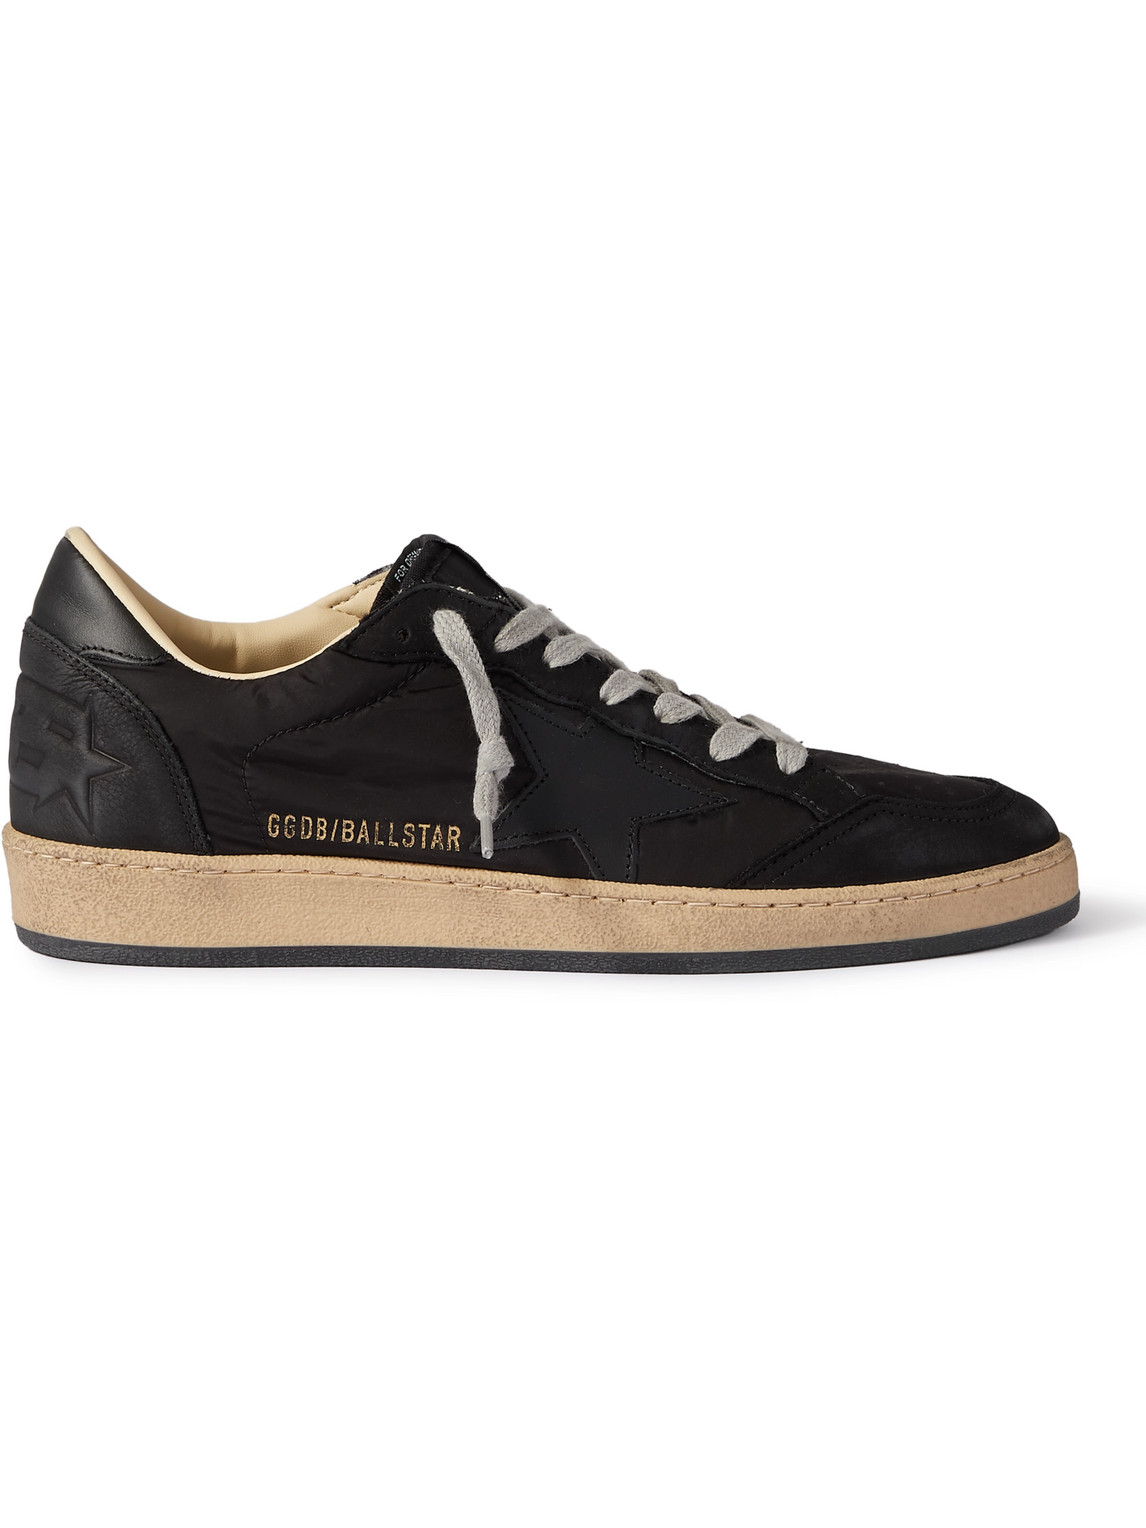 Golden Goose Ball Star Distressed Nubuck And Leather-trimmed Nylon Sneakers In Black